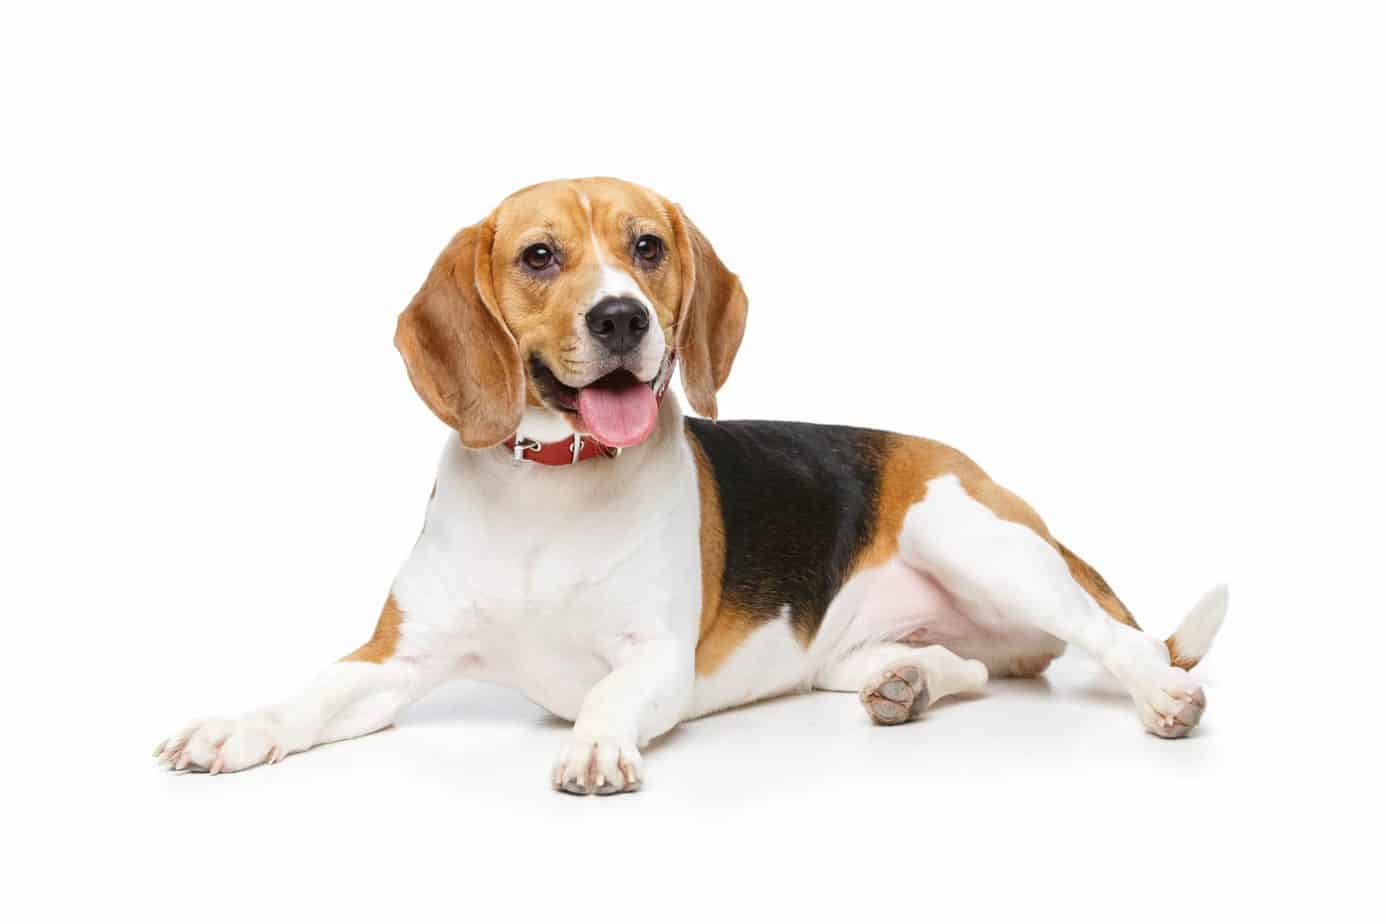 Happy beagle on white background. Follow these five dog health tips: Feed your dog quality meals, take them for walks, pay attention when they're sick, sign them up for pet insurance, and shower them with love and attention.